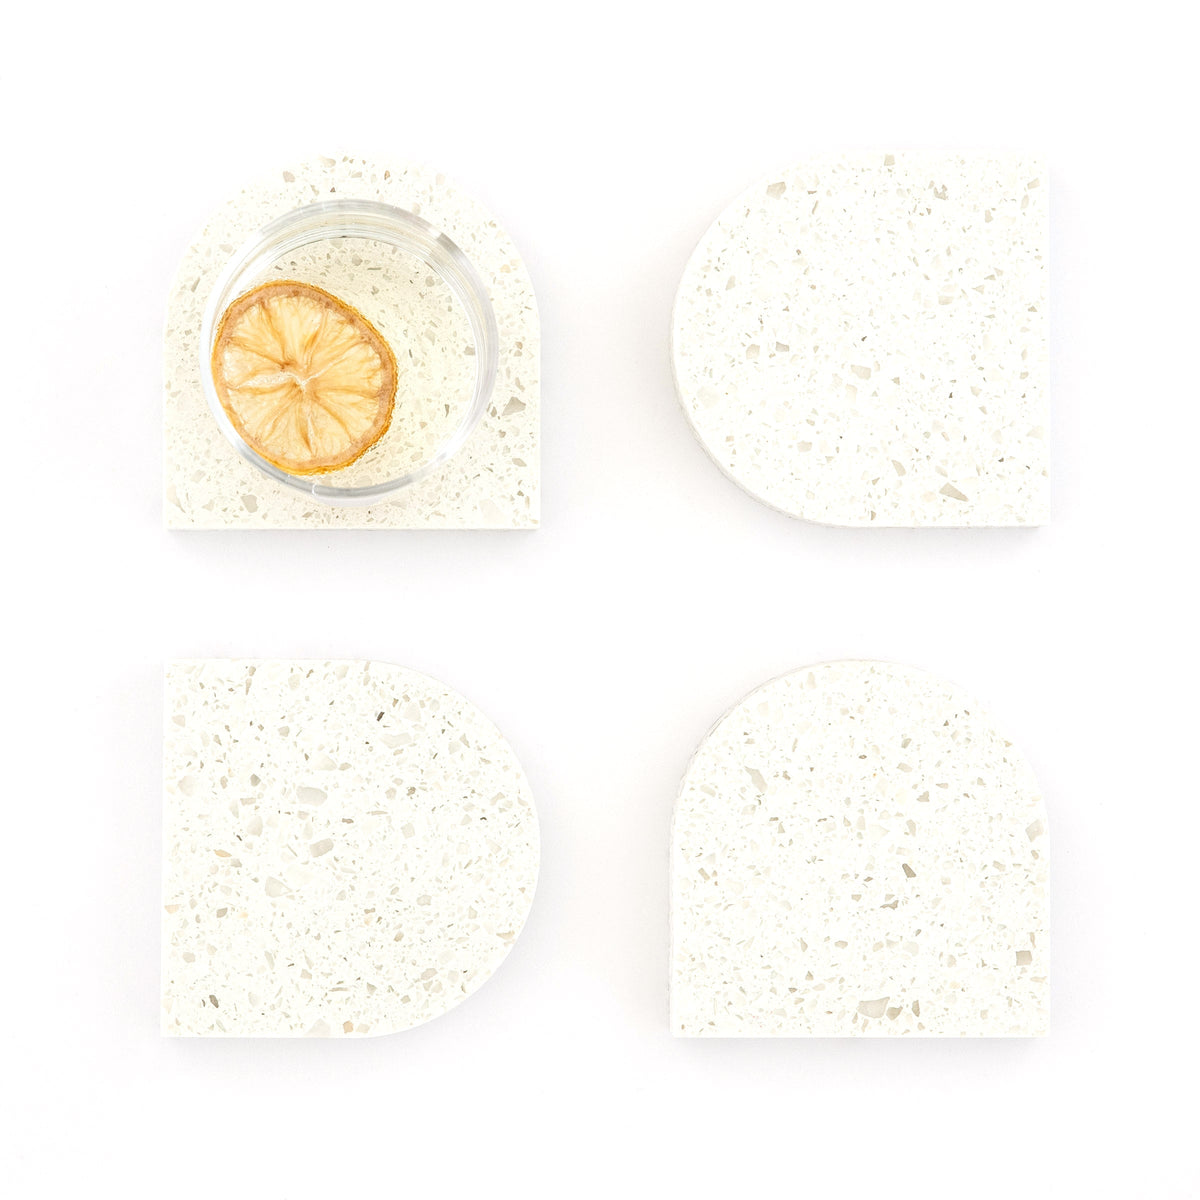 Quartz Arch Coaster™ Set 4 Piece in Nougat™. Quartz white stone coasters in an arch shape. These white quartz coasters are specked with decorative quartz with a cork backing. White marble coasters in appearance however quartz has greater scratch resistance and is lower maintenance. caesarstone quartz